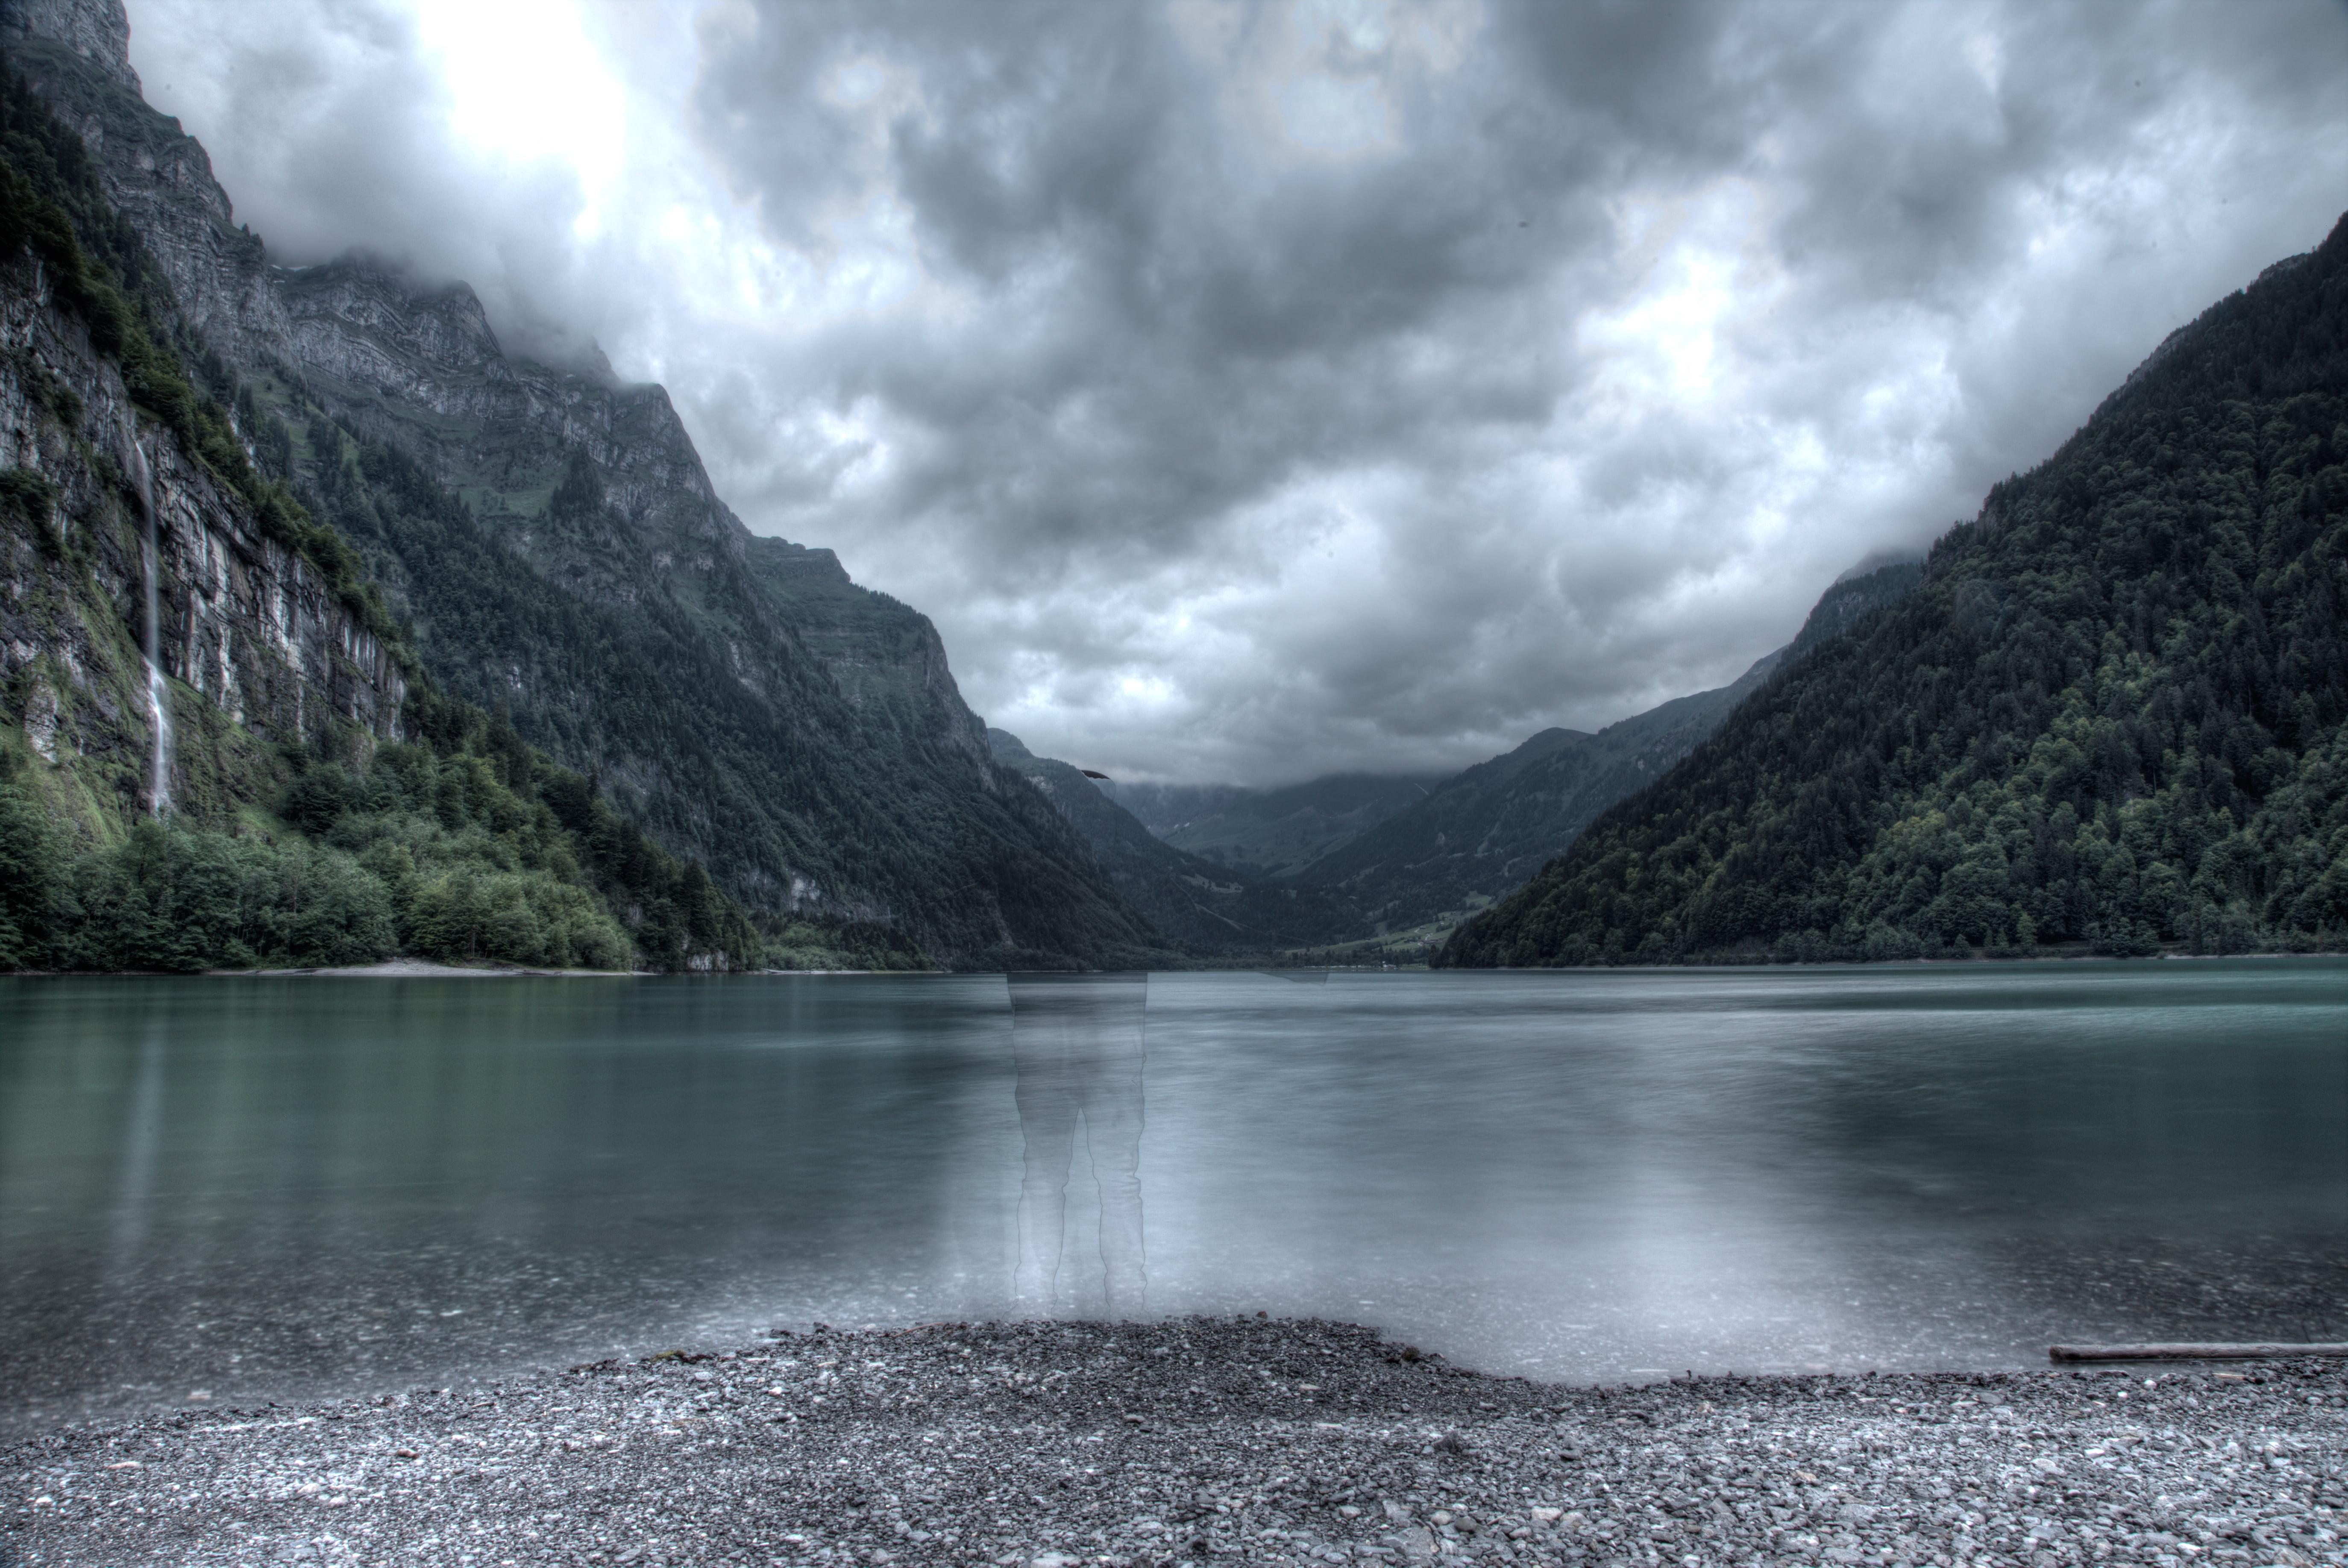 Lake between the mountain during cloudy day HD wallpaper. Wallpaper